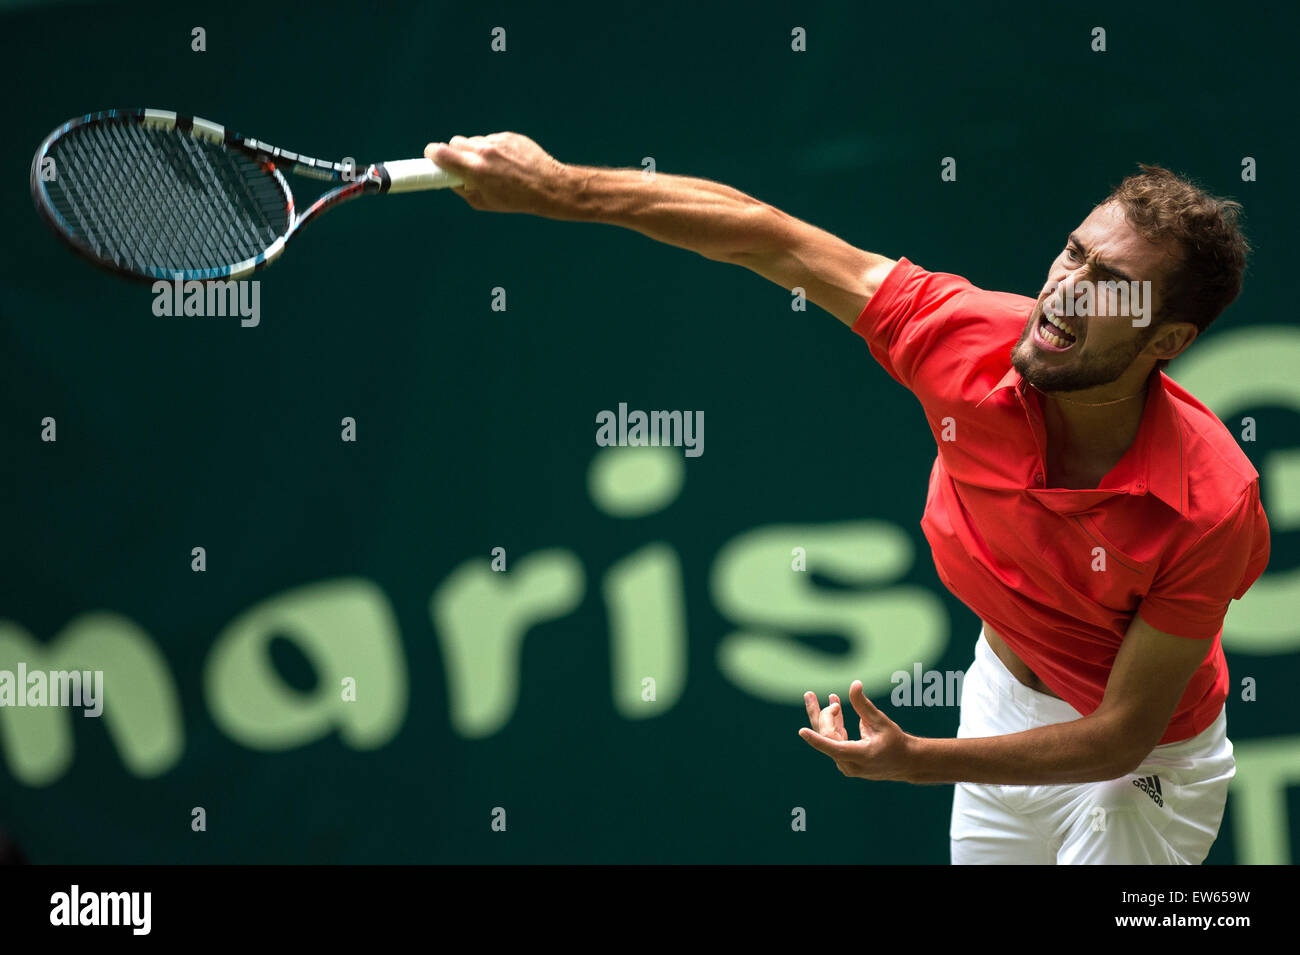 Halle, Germany. 18th June, 2015. Jerzy Janowicz of Poland in action in the  round of 16 match against Falla of Colombia during the ATP tennis  tournament in Halle, Germany, 18 June 2015.